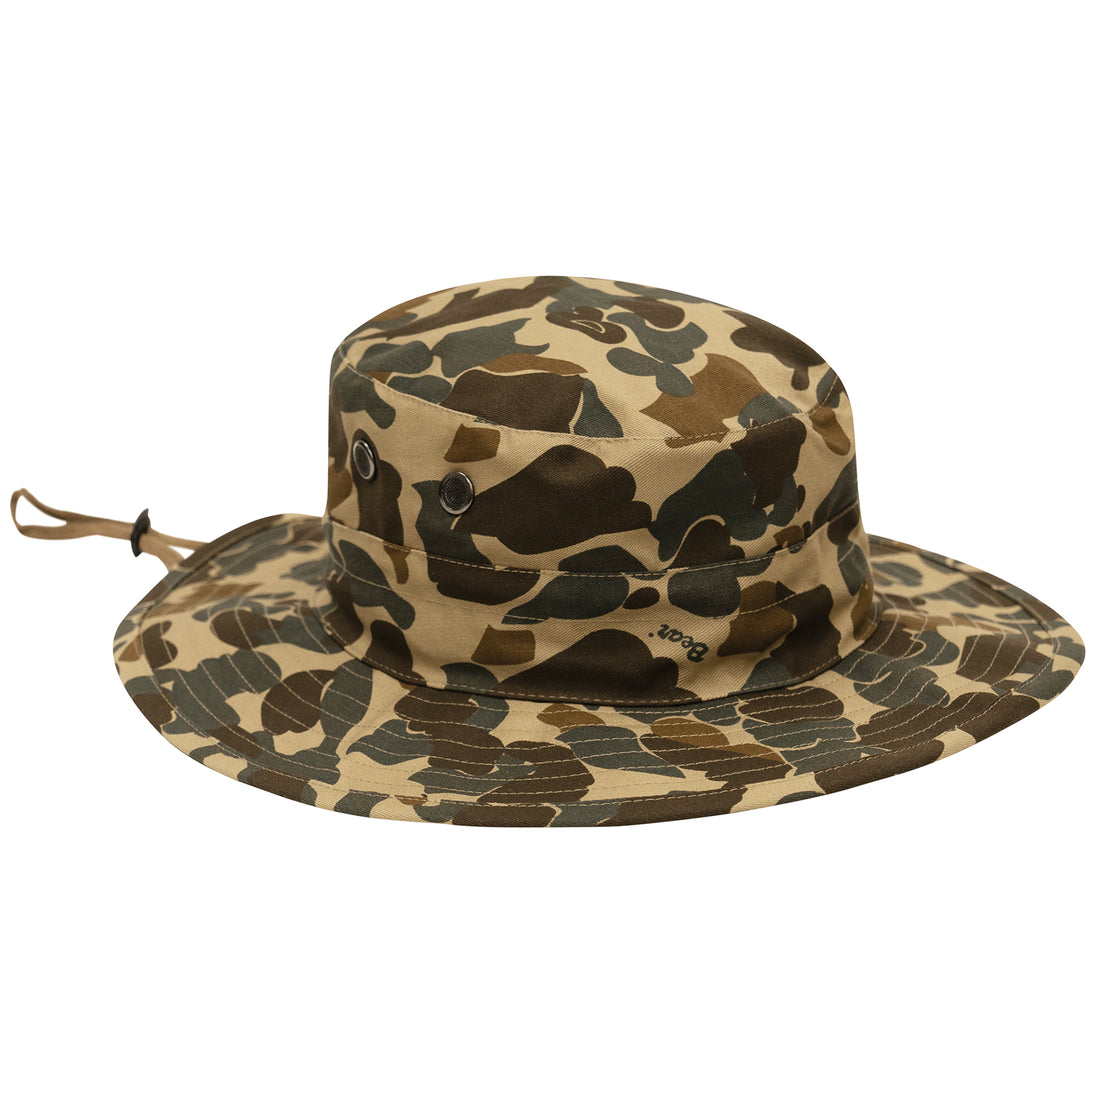 Rothco Adjustable Boonie Hat in Fred Bear Camo!